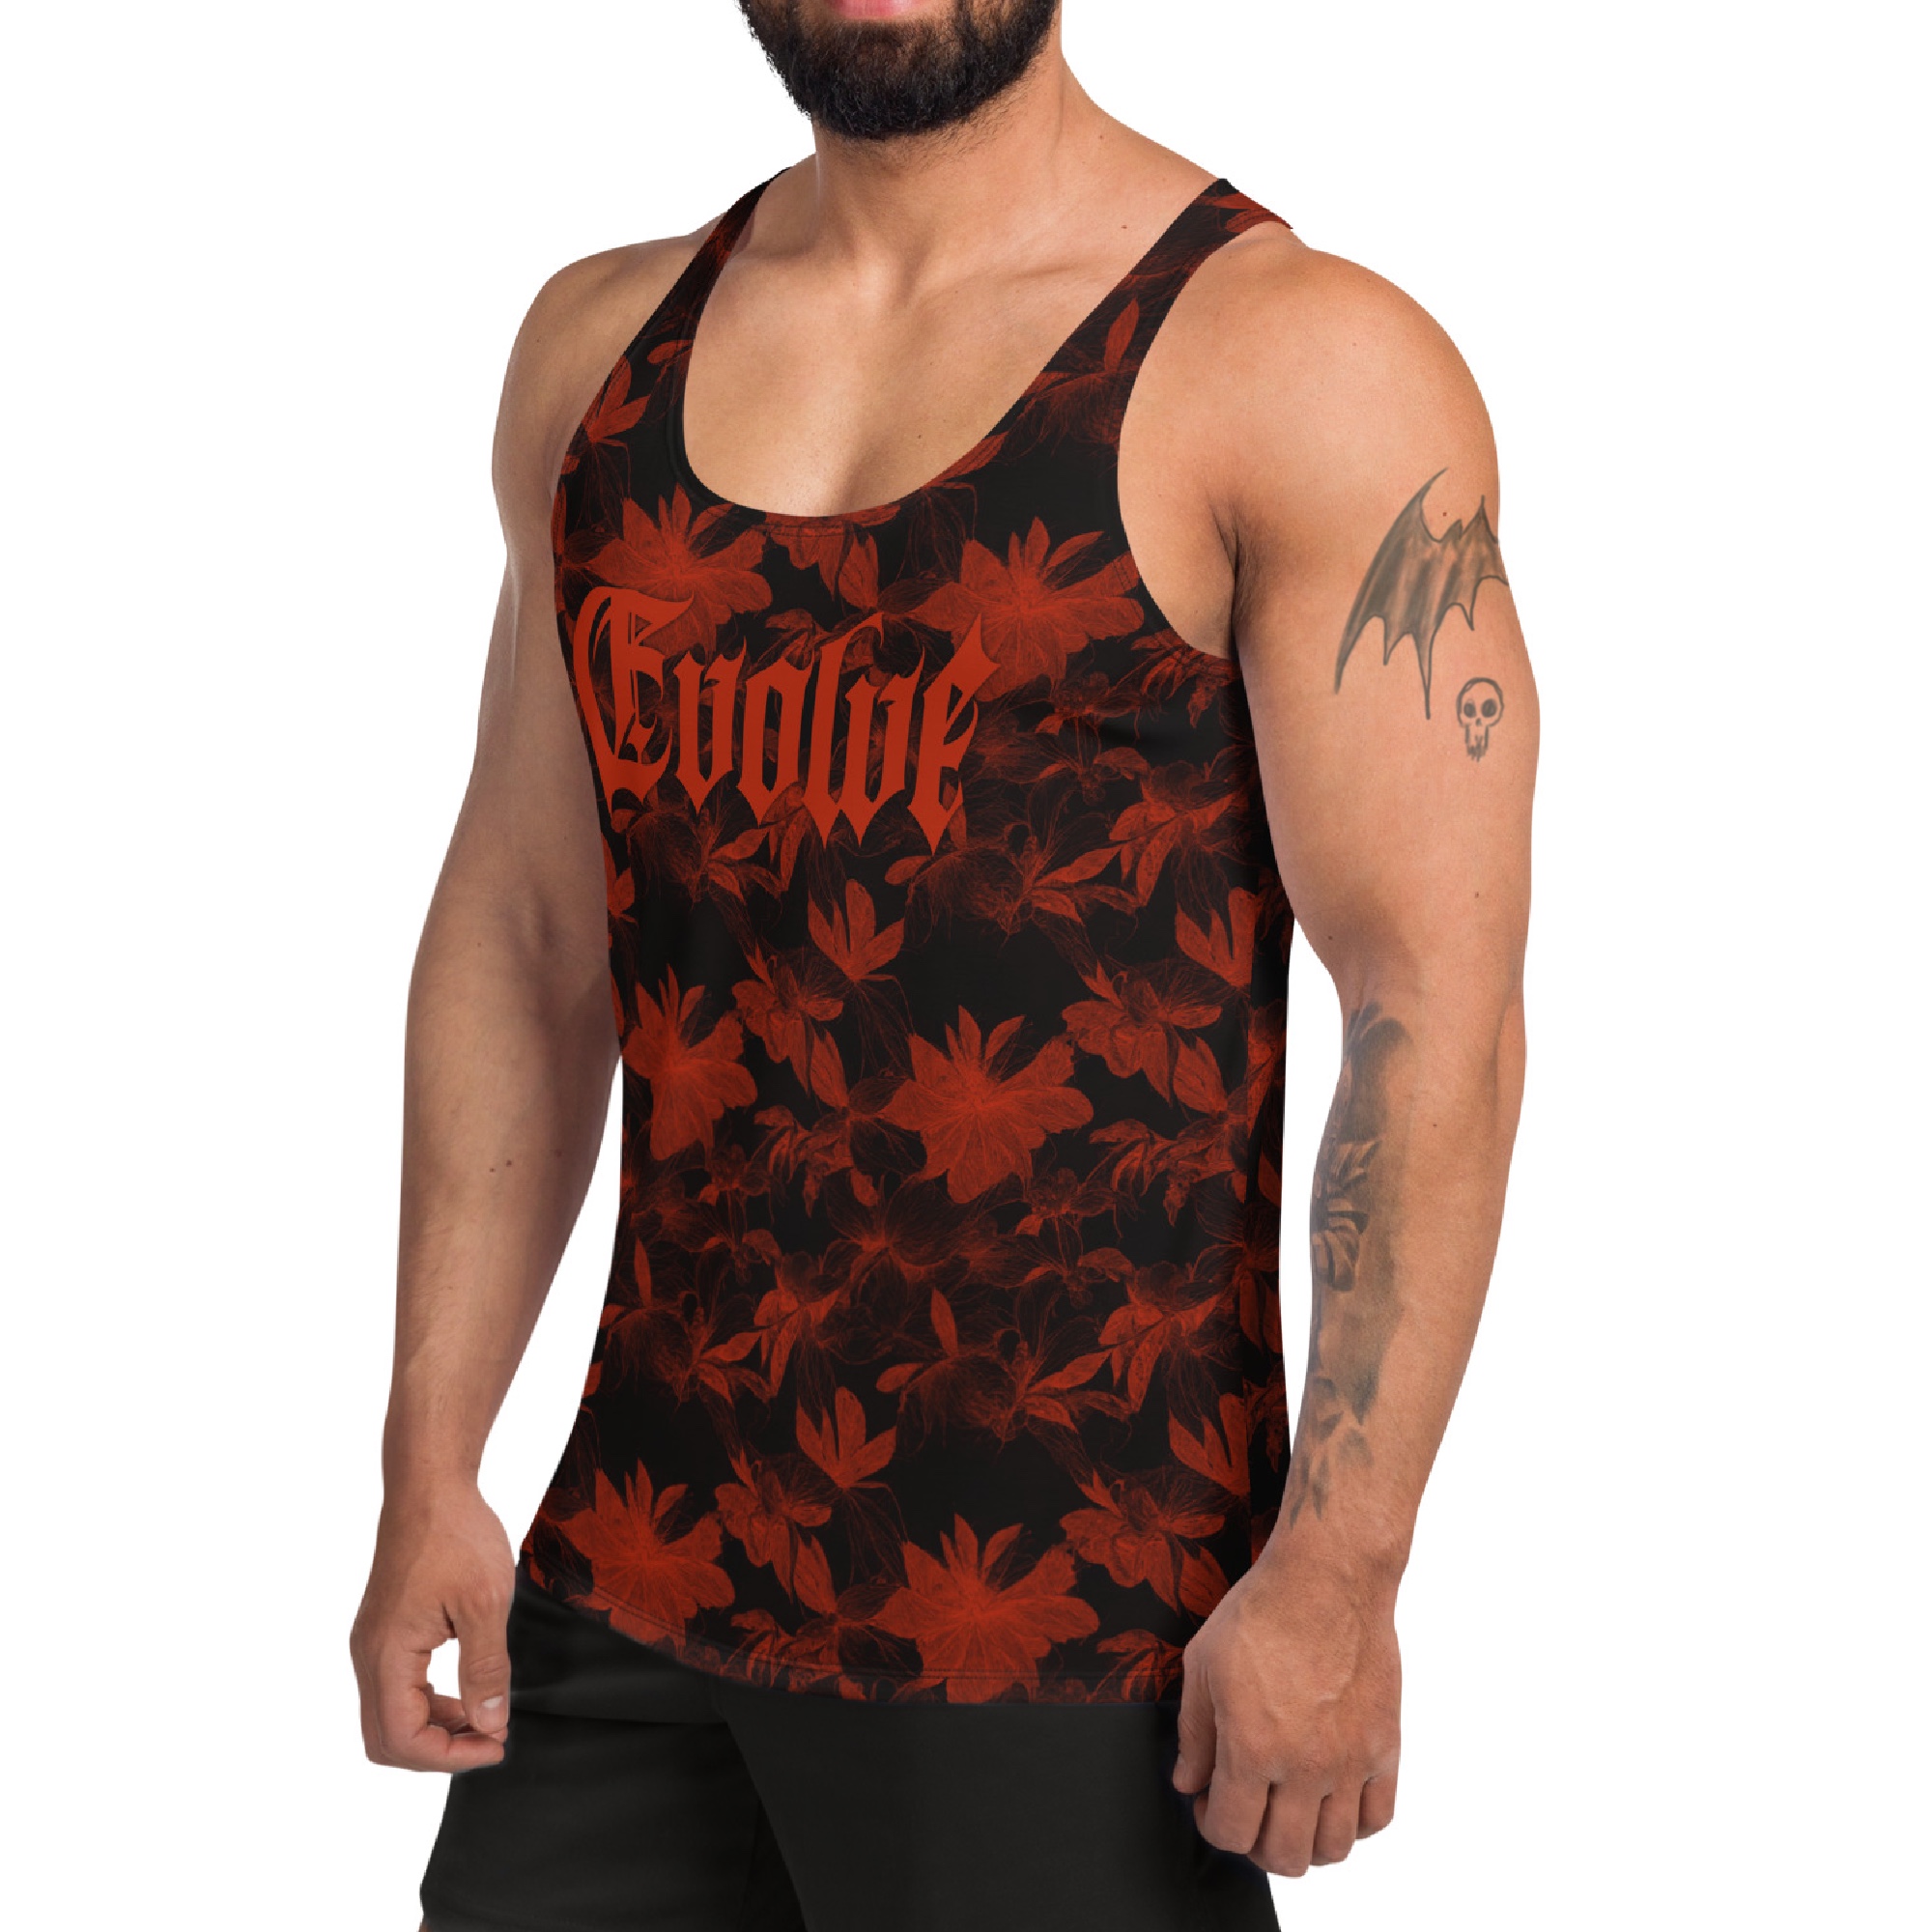 Featured image for “Evolve floral blood - Unisex Tank Top”